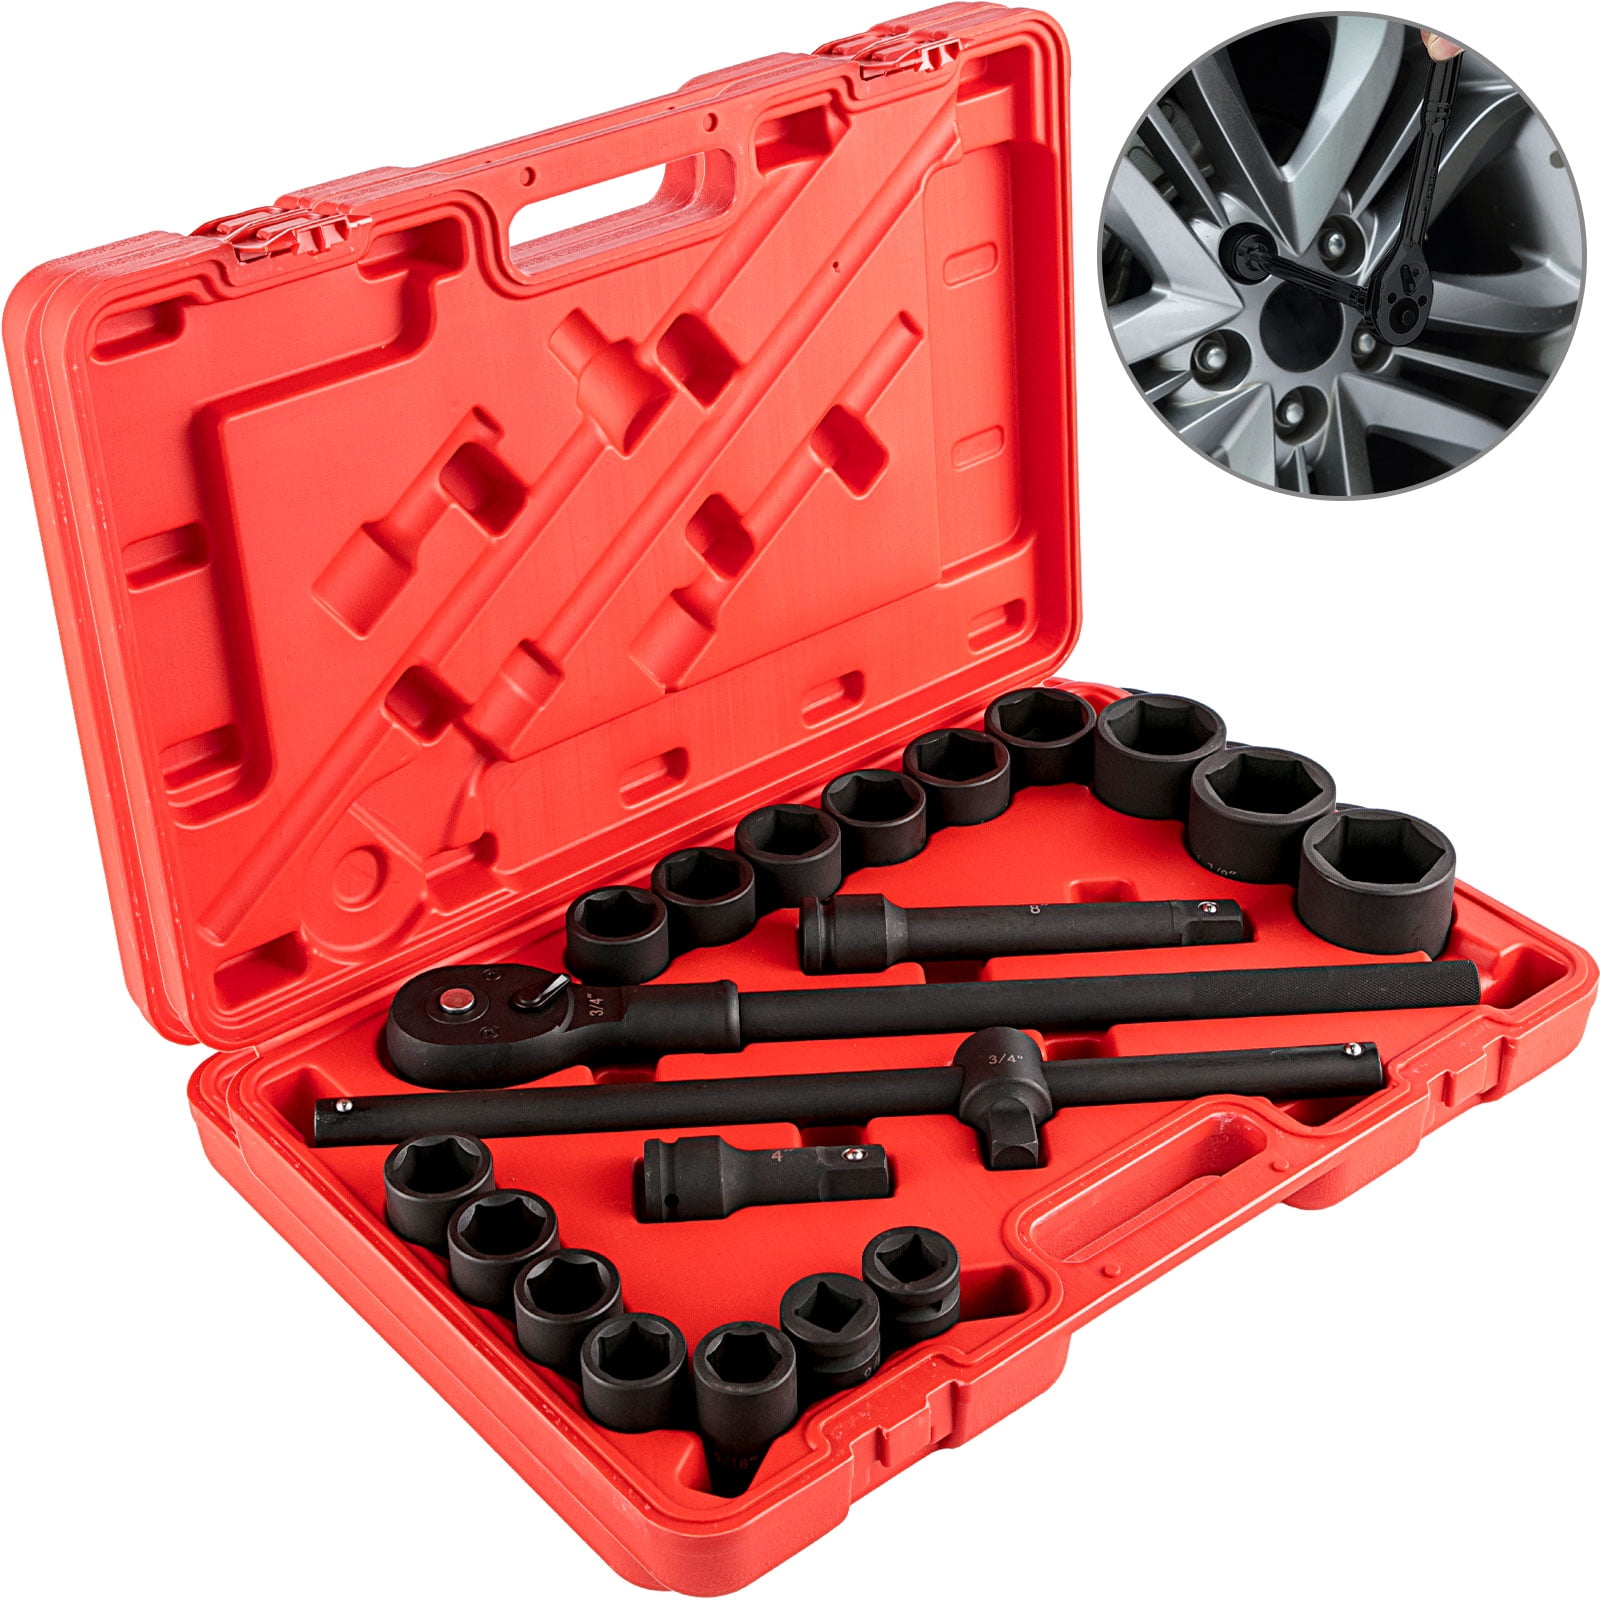 18PC 3/4" DRIVE DEEP AIR IMPACT SOCKETS AXLE NUTS REMOVER INSTALLER SAE AND MM 